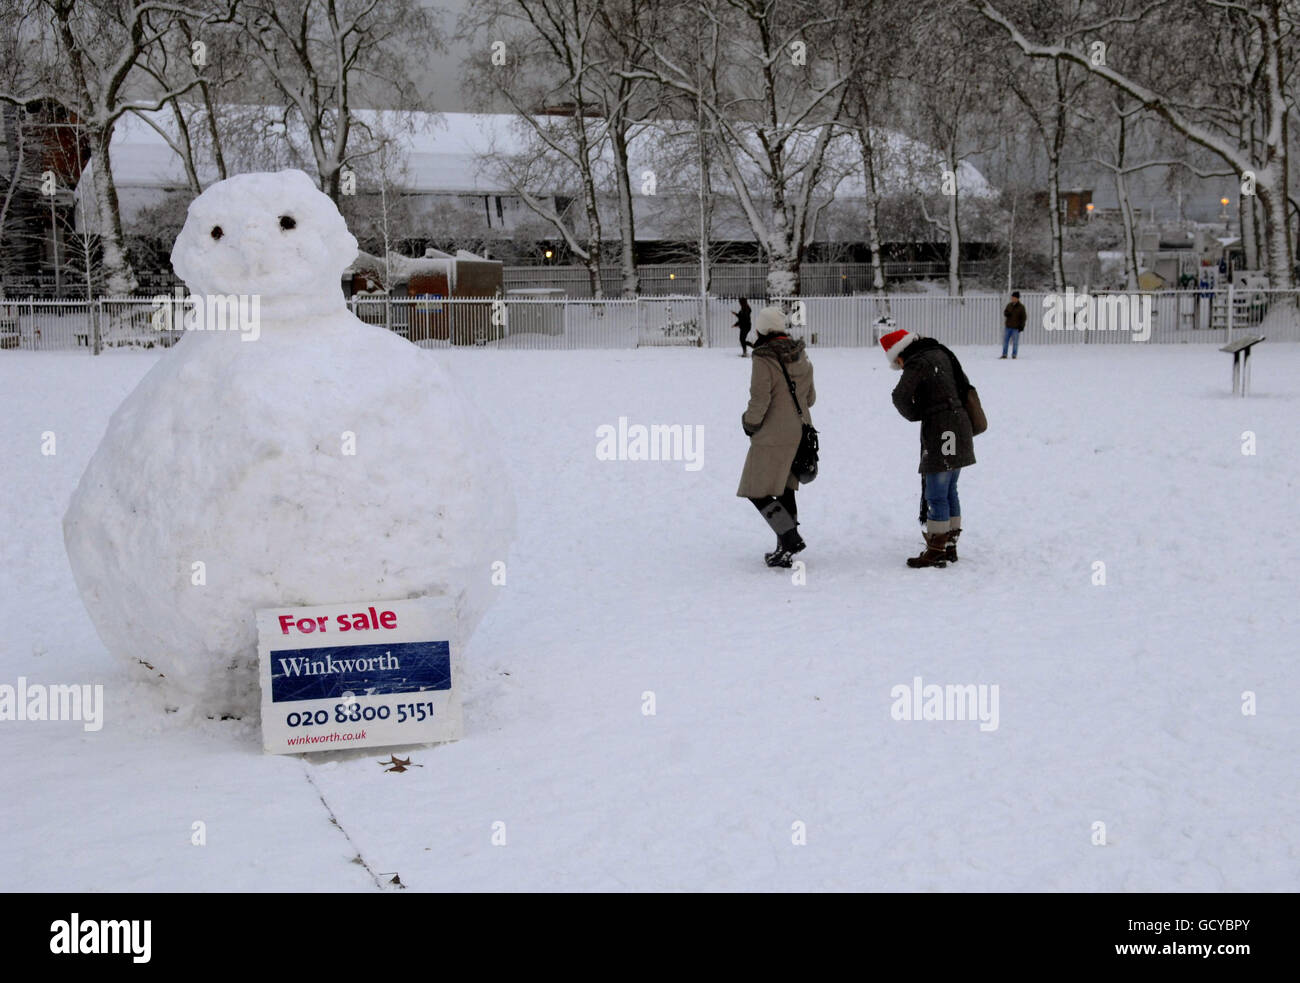 A snowman has a for sale sign placed below it in Finsbury Park, north London, after heavy snowfall across the capital. Stock Photo